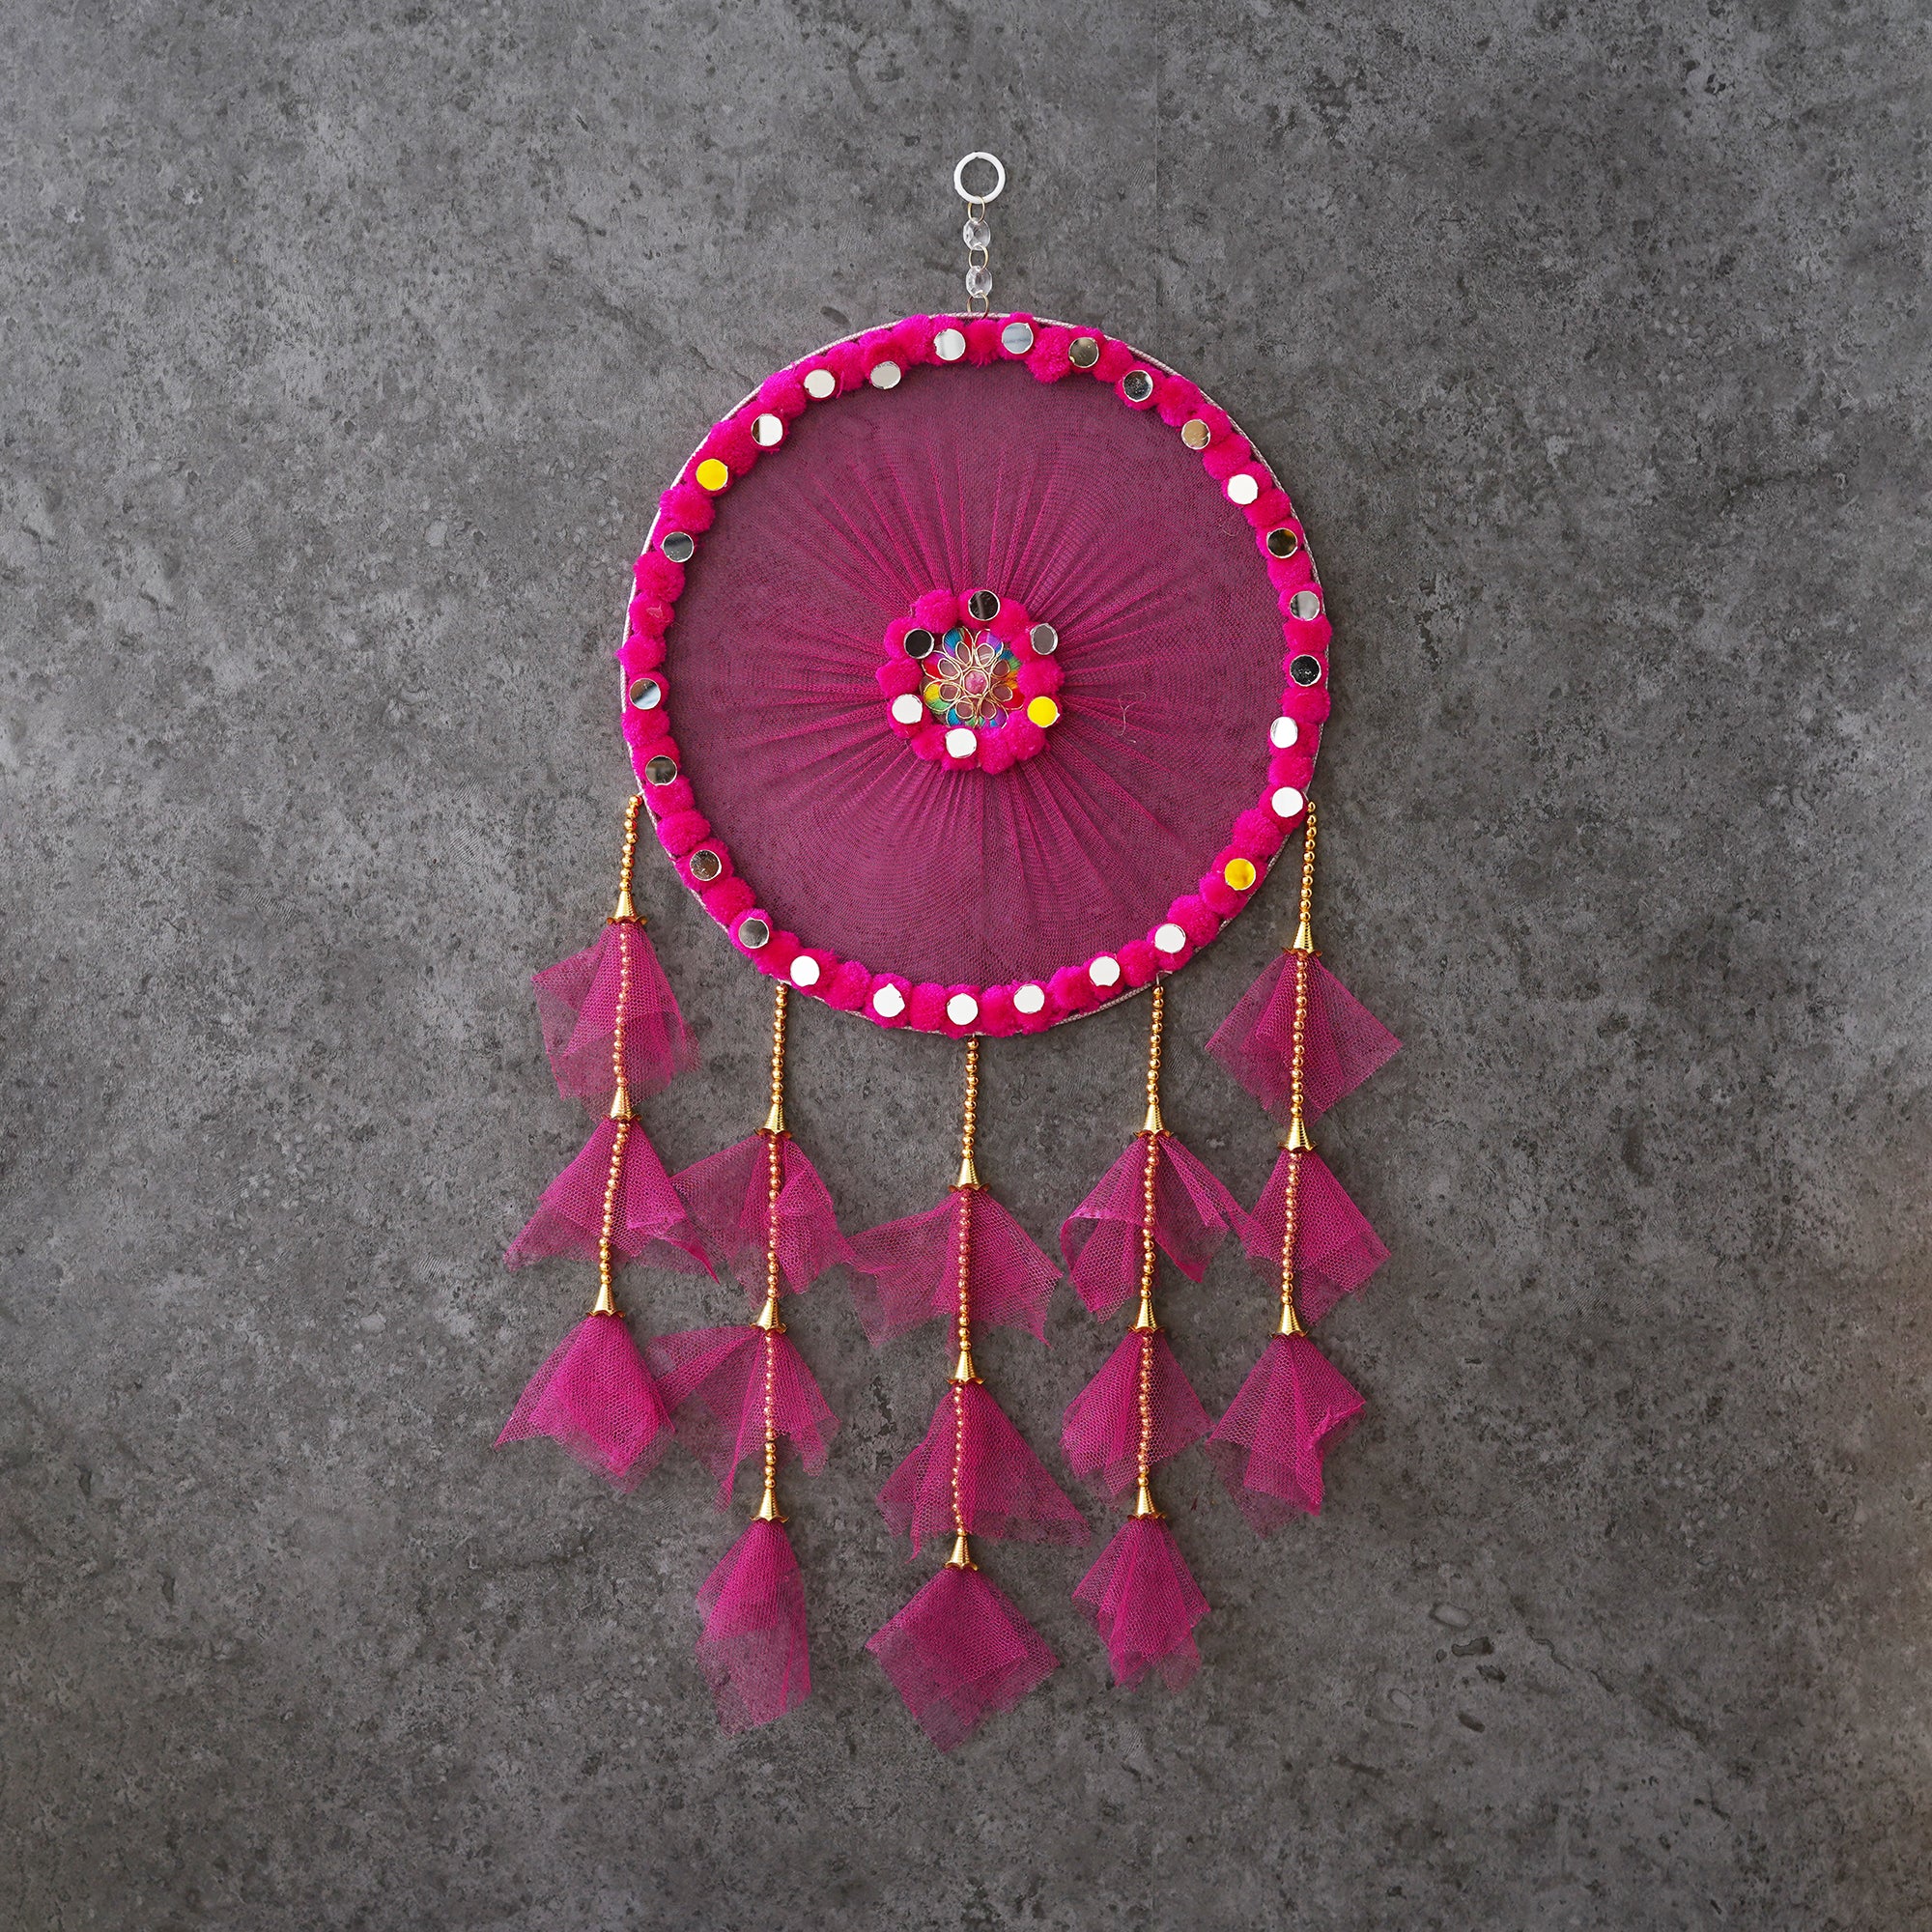 eCraftIndia Pink Wall Hanging Dream Catcher For Home Decor - Perfect Window, Bedroom, Living Room, Wall Decoration Item 5